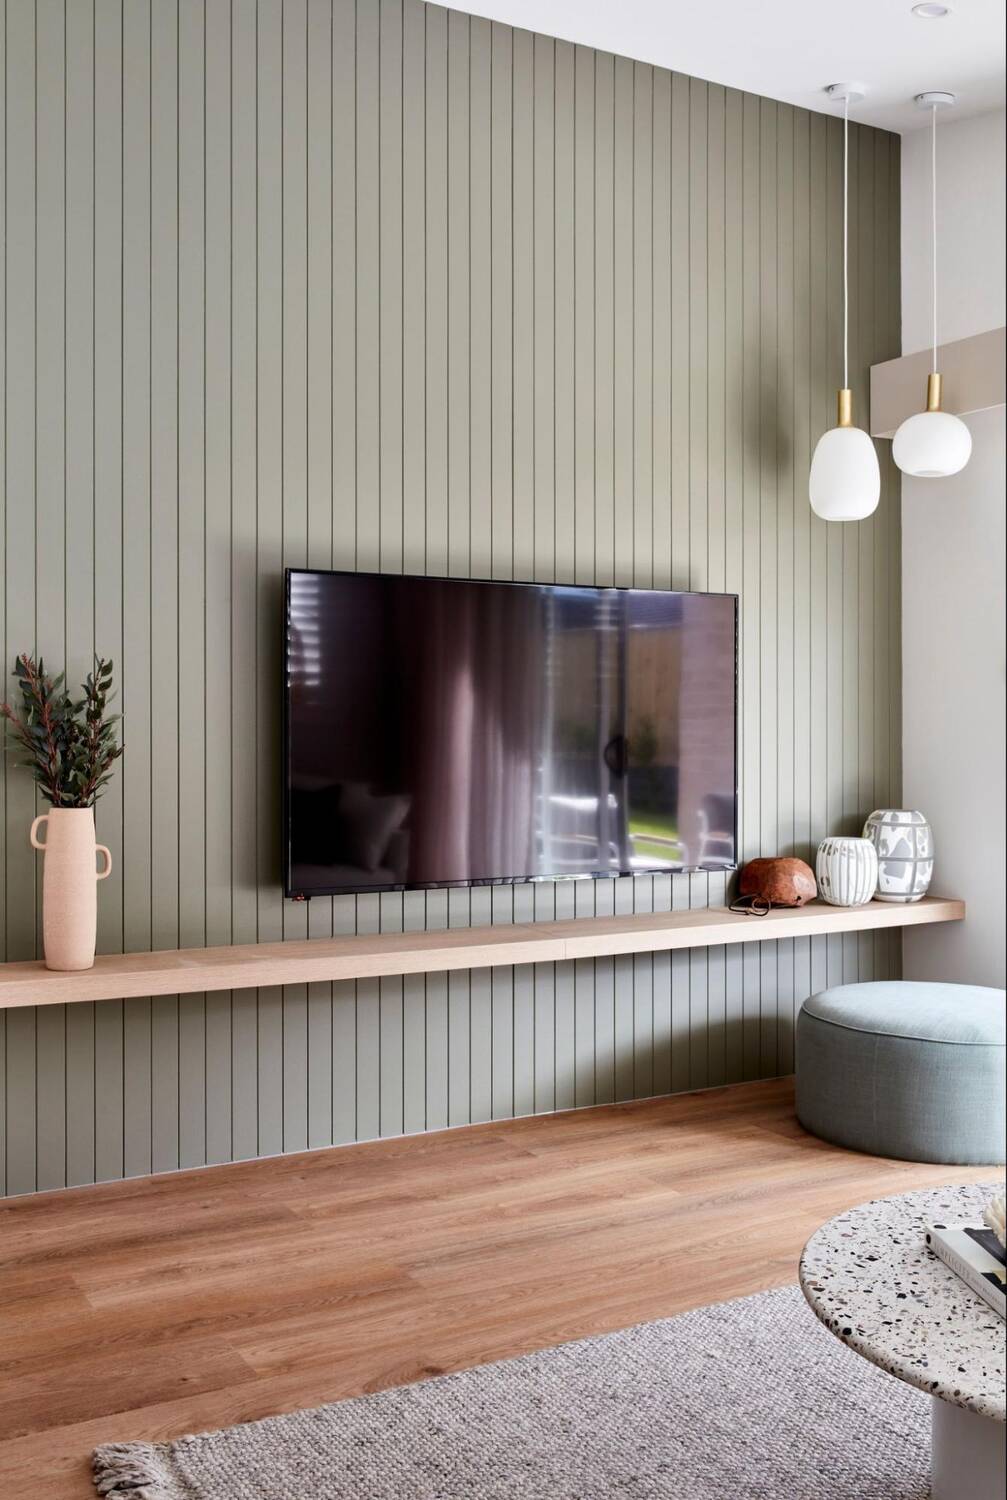 TV mounted on the wall above a shelf